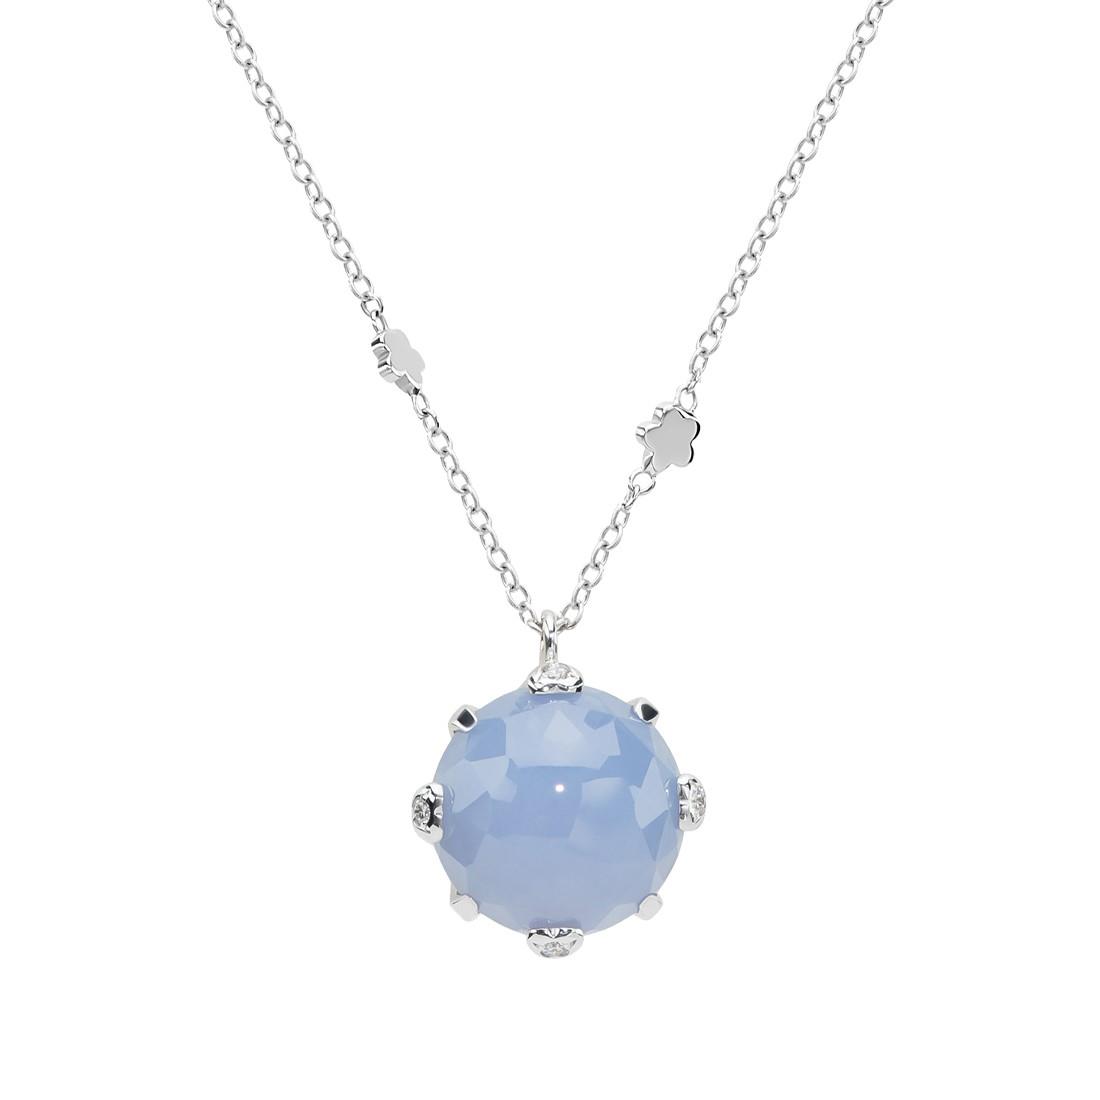 Necklace with chalcedony pendant - PASQUALE BRUNI